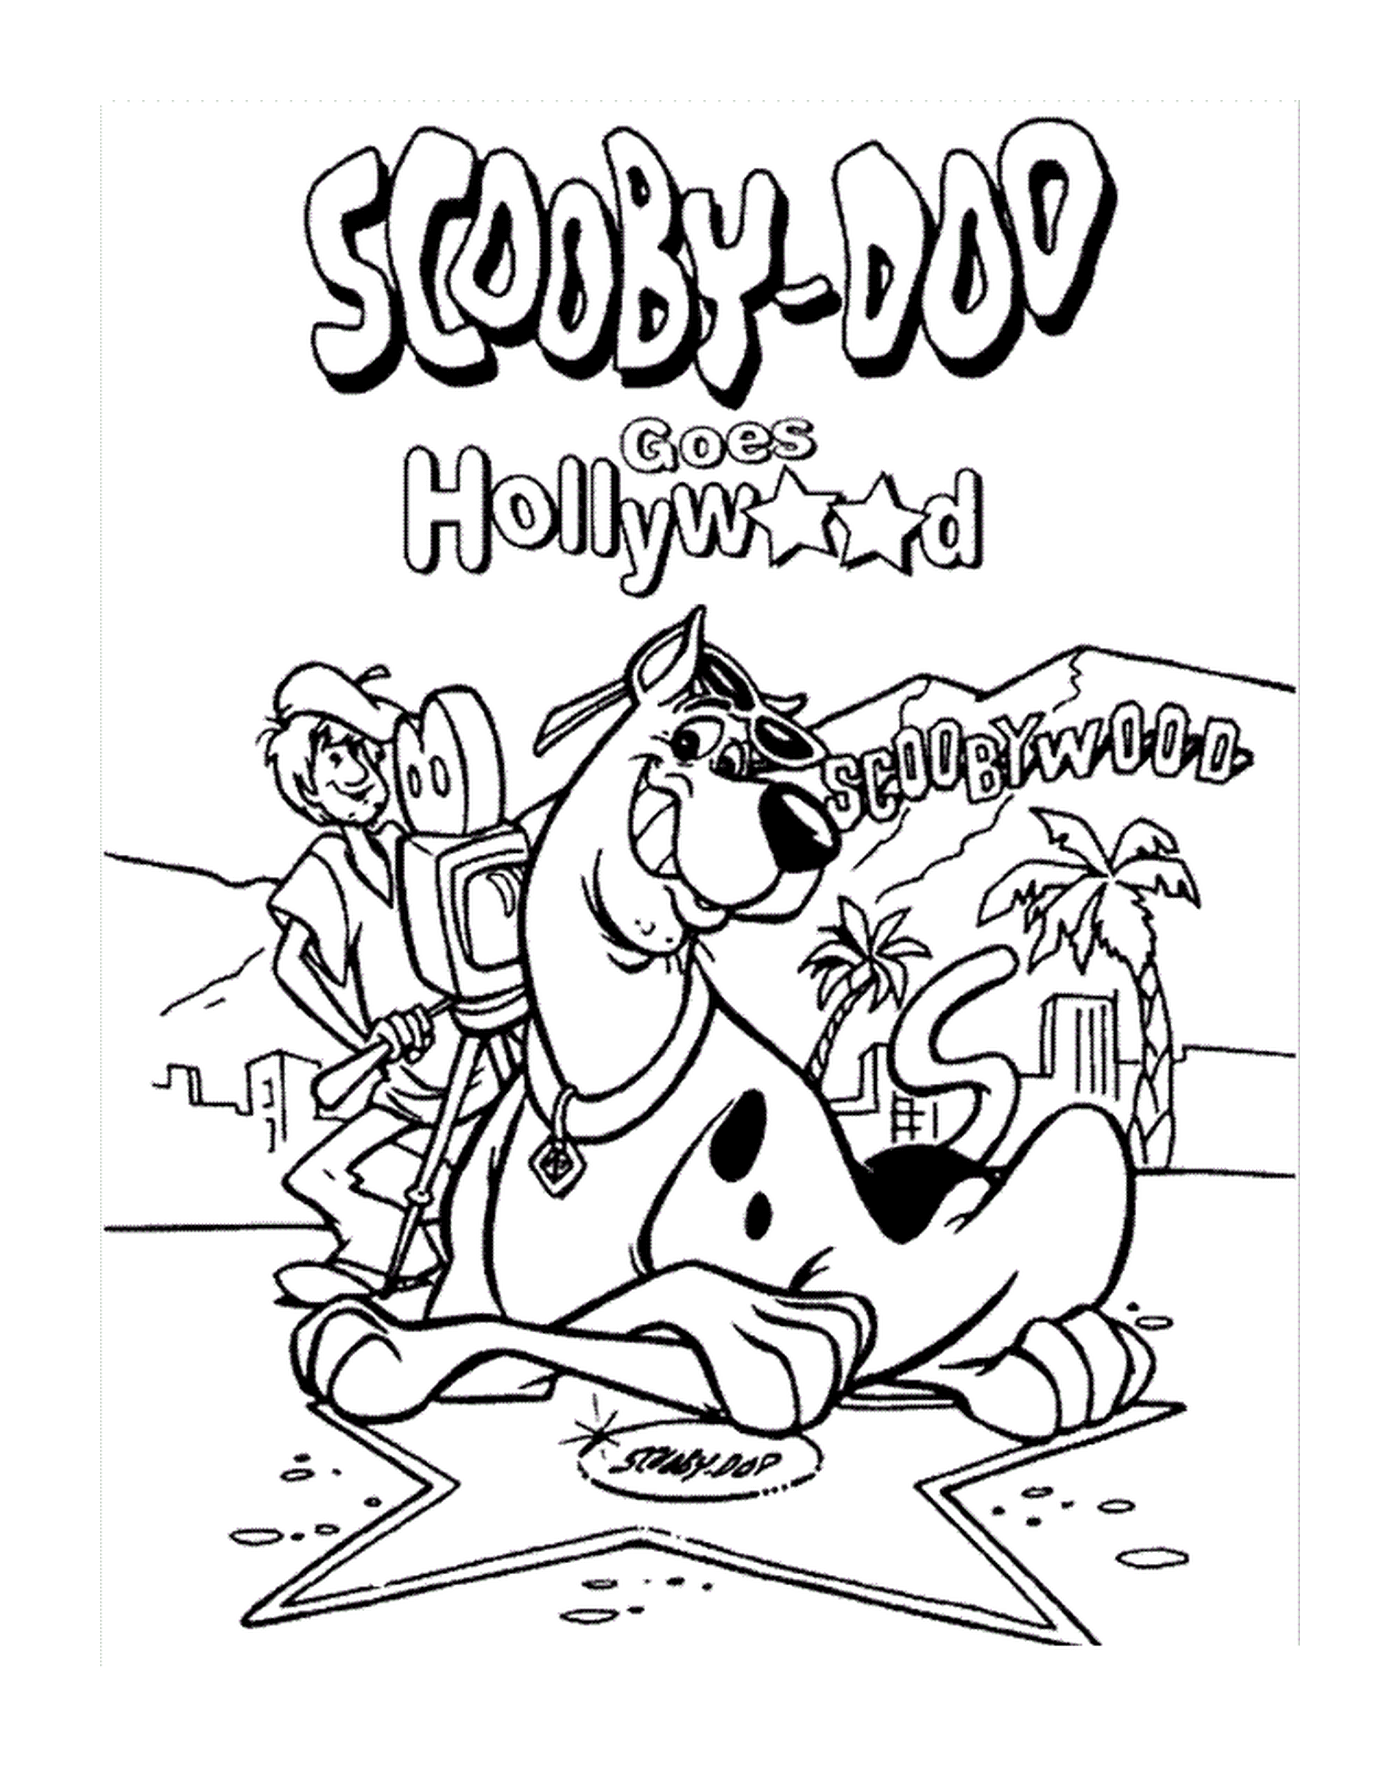  Scooby Doo in Hollywood 